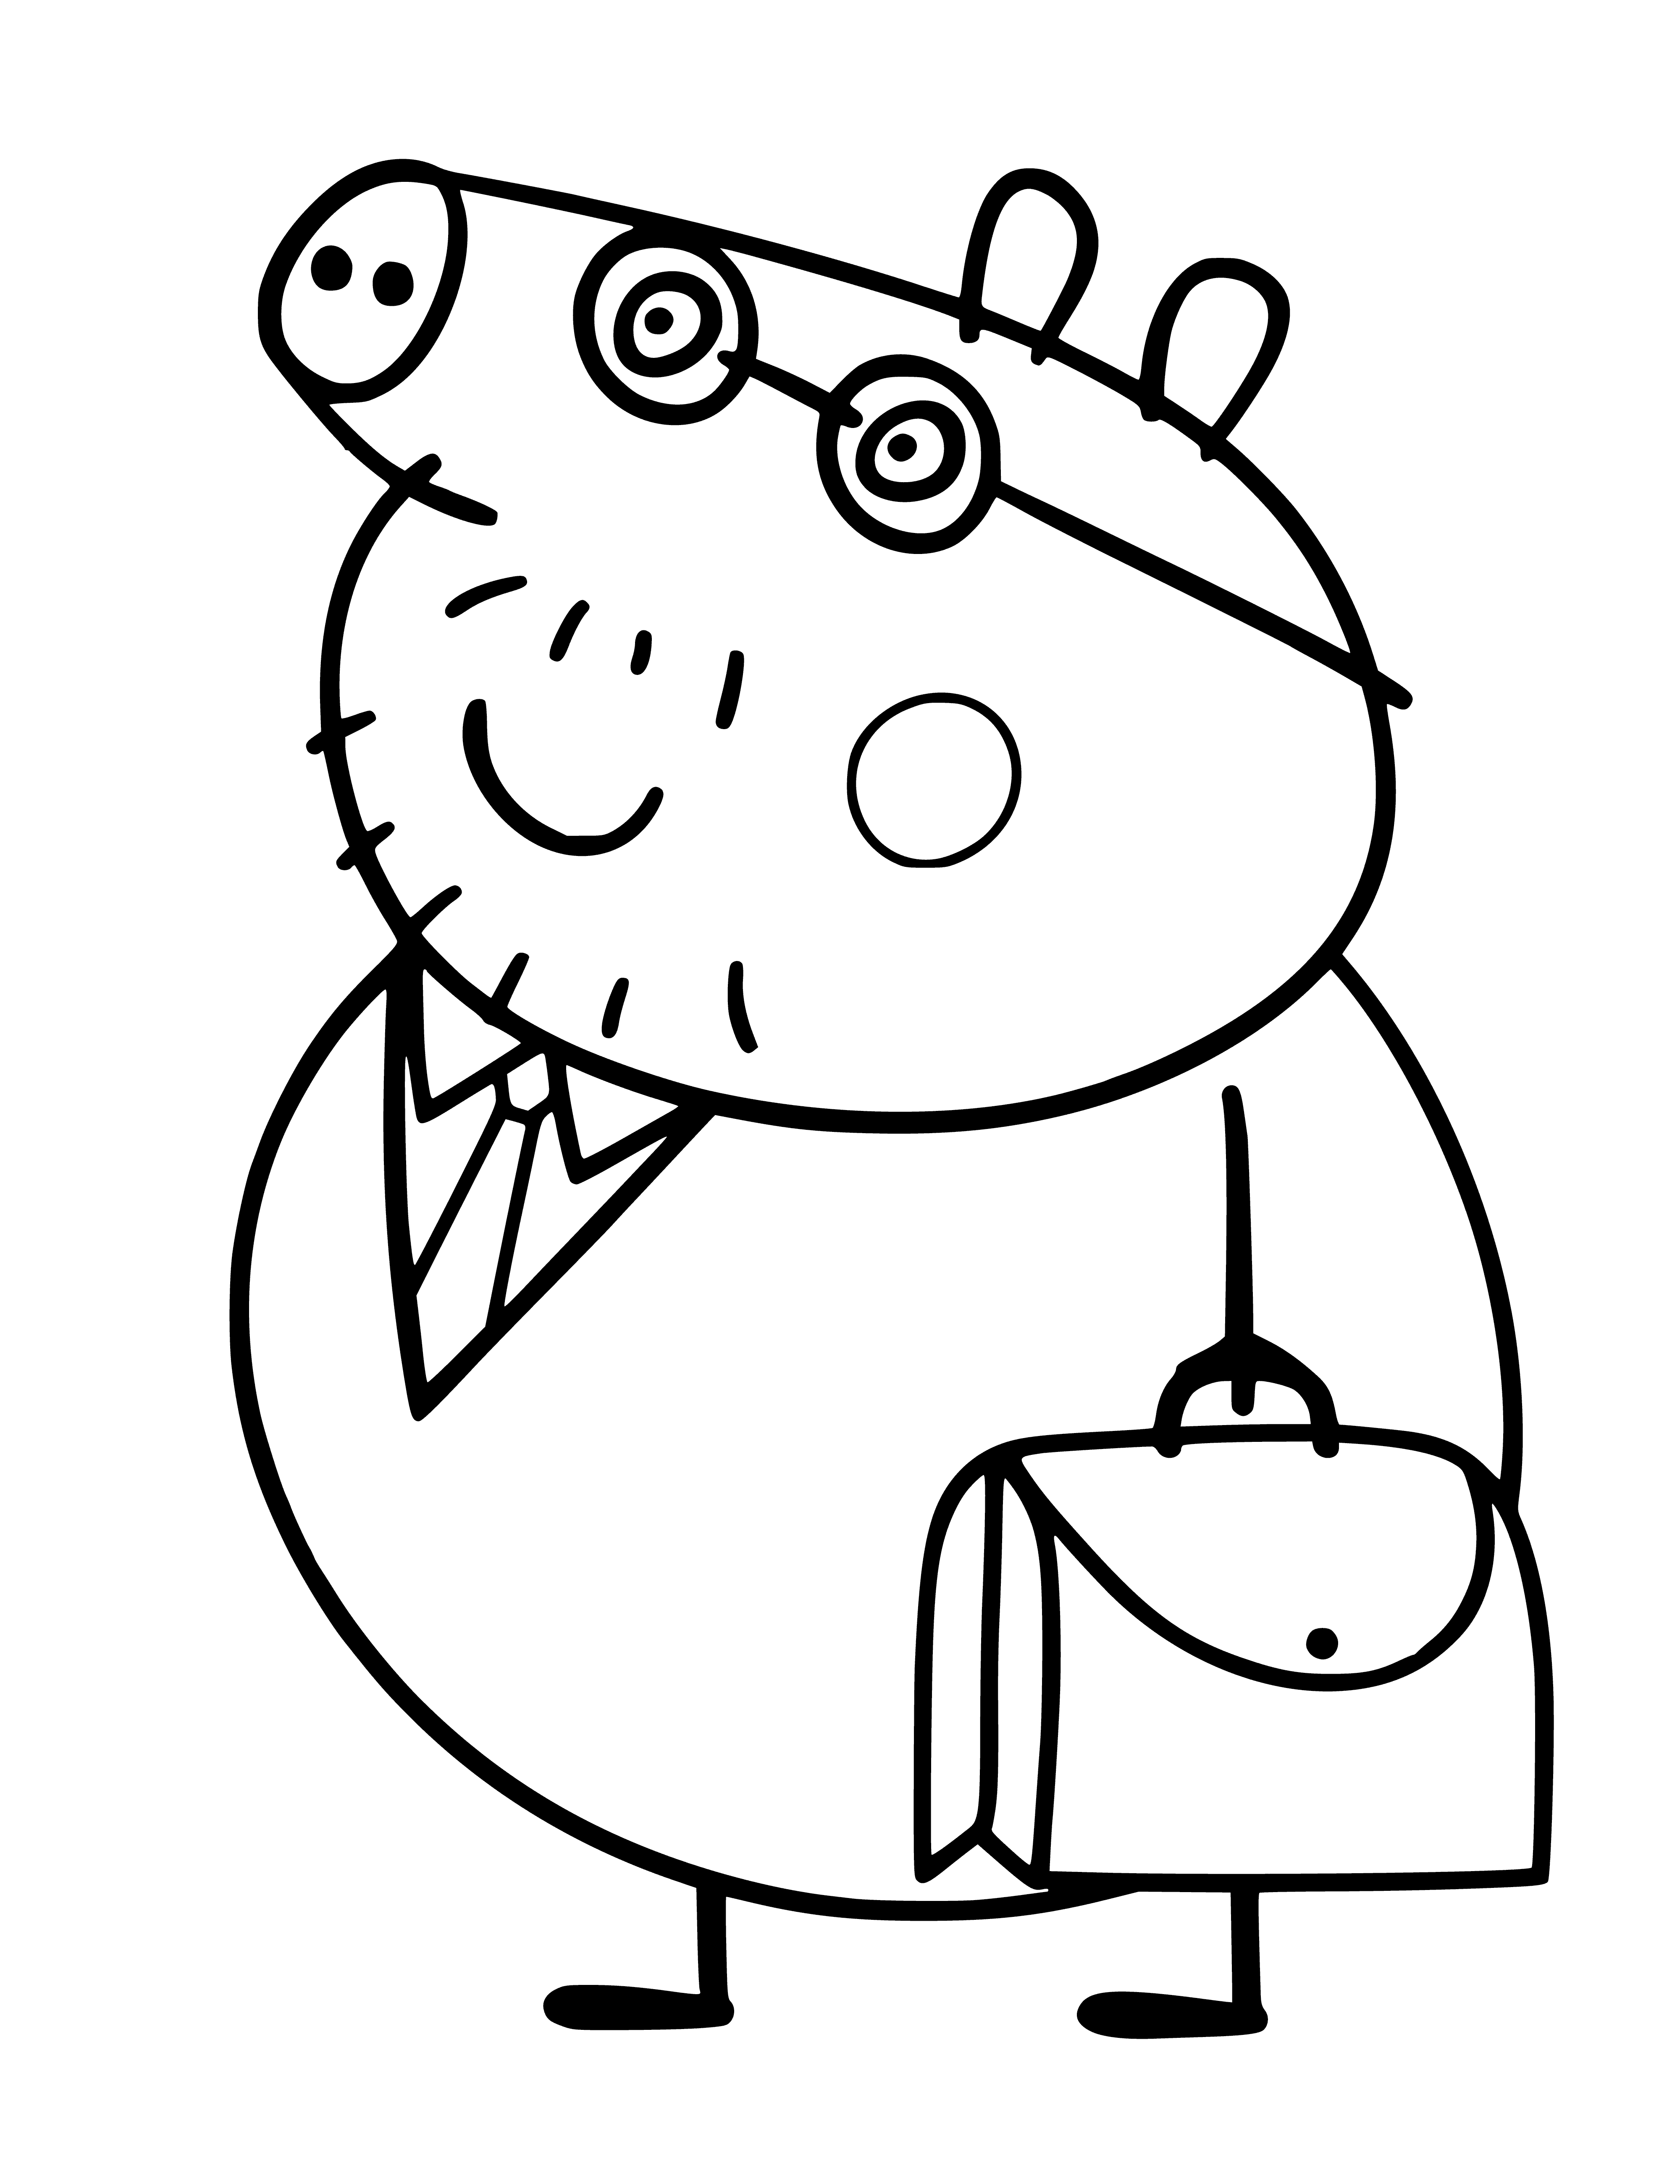 Daddy Pig got ready for work coloring page